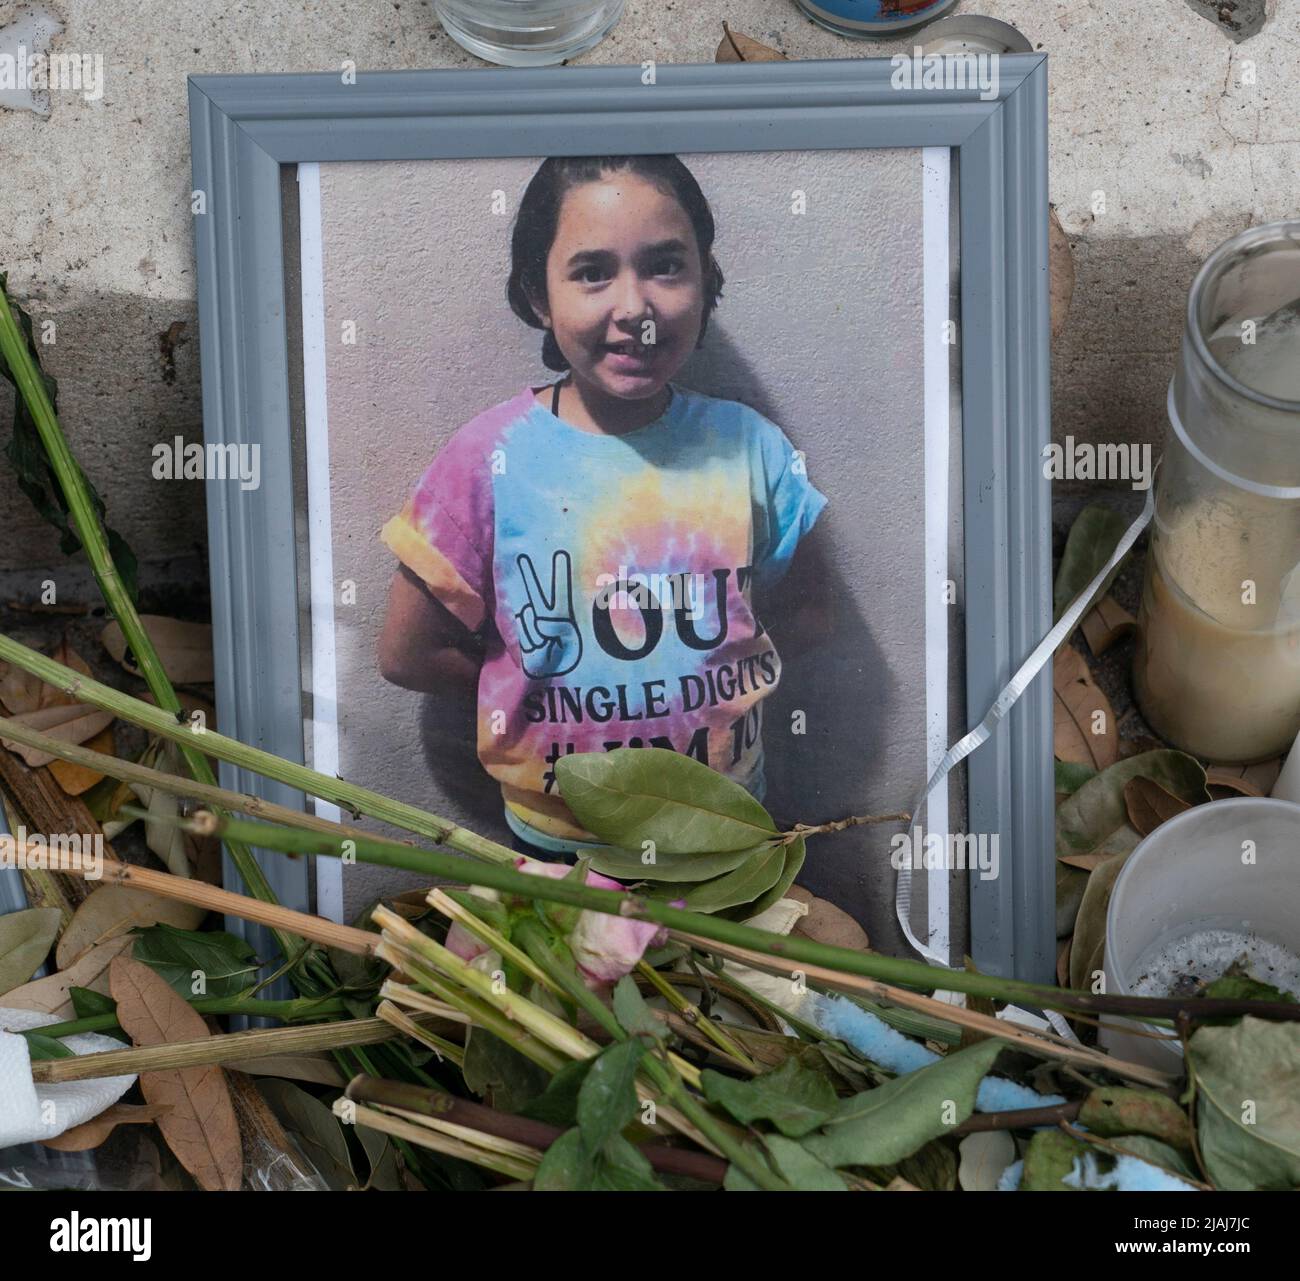 Austin Texas USA, May 30 2022: Photos of most of the 21 victims killed in last week's Uvalde, Texas USA school shooting, including student Alithia Ramirez, lie among candles and flowers at a makeshift memorial on the steps to the Texas State Capitol. Public outrage over another mass shooting and a seemingly ineffective police response continues almost a week after the murders. Credit: Bob Daemmrich/Alamy Live News Stock Photo